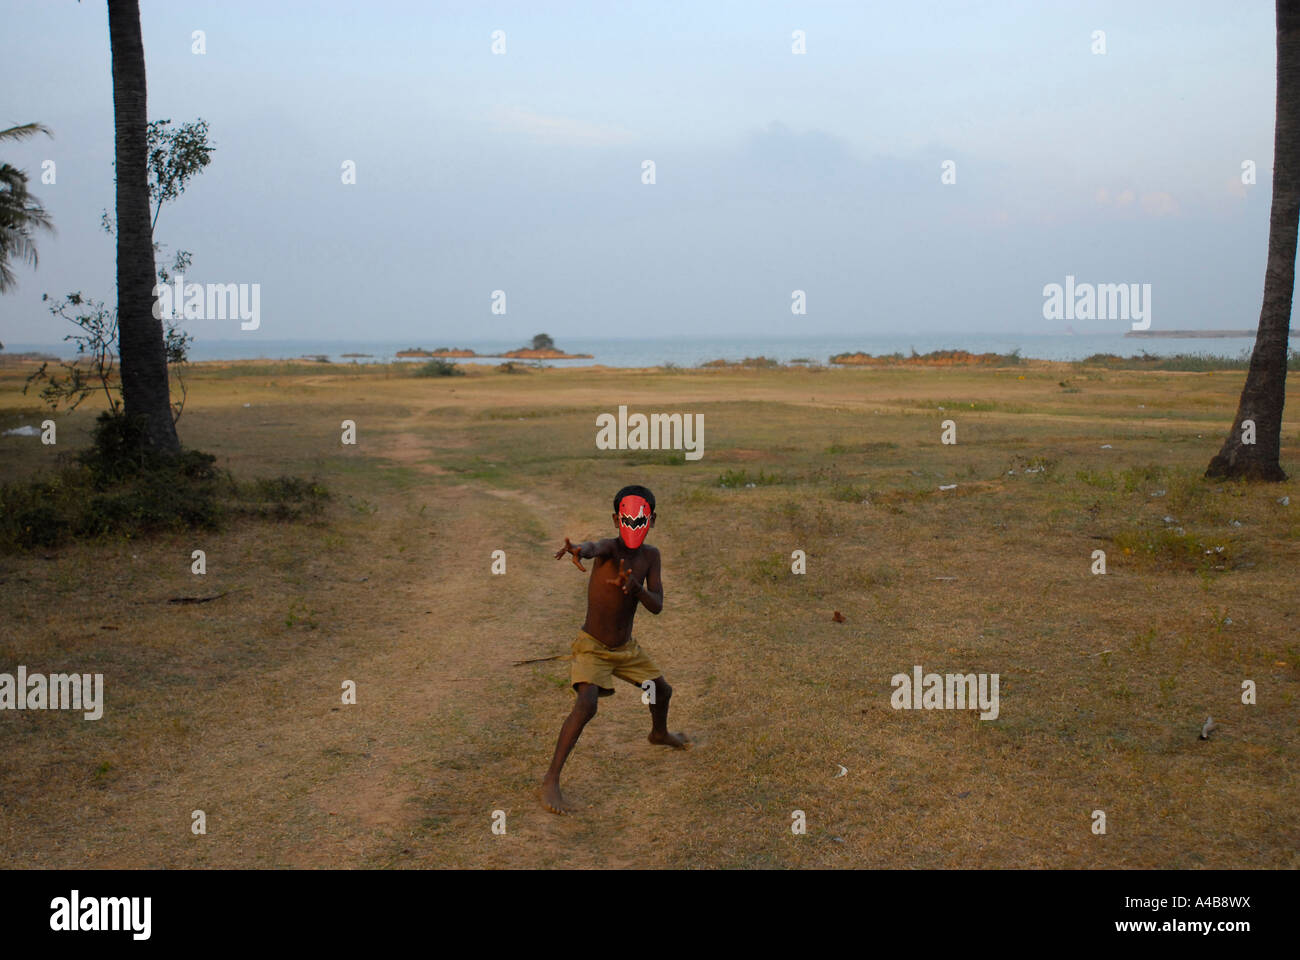 Stock image of an Indian tribal boy with a Spiderman mask on standing alone near Chennai Stock Photo